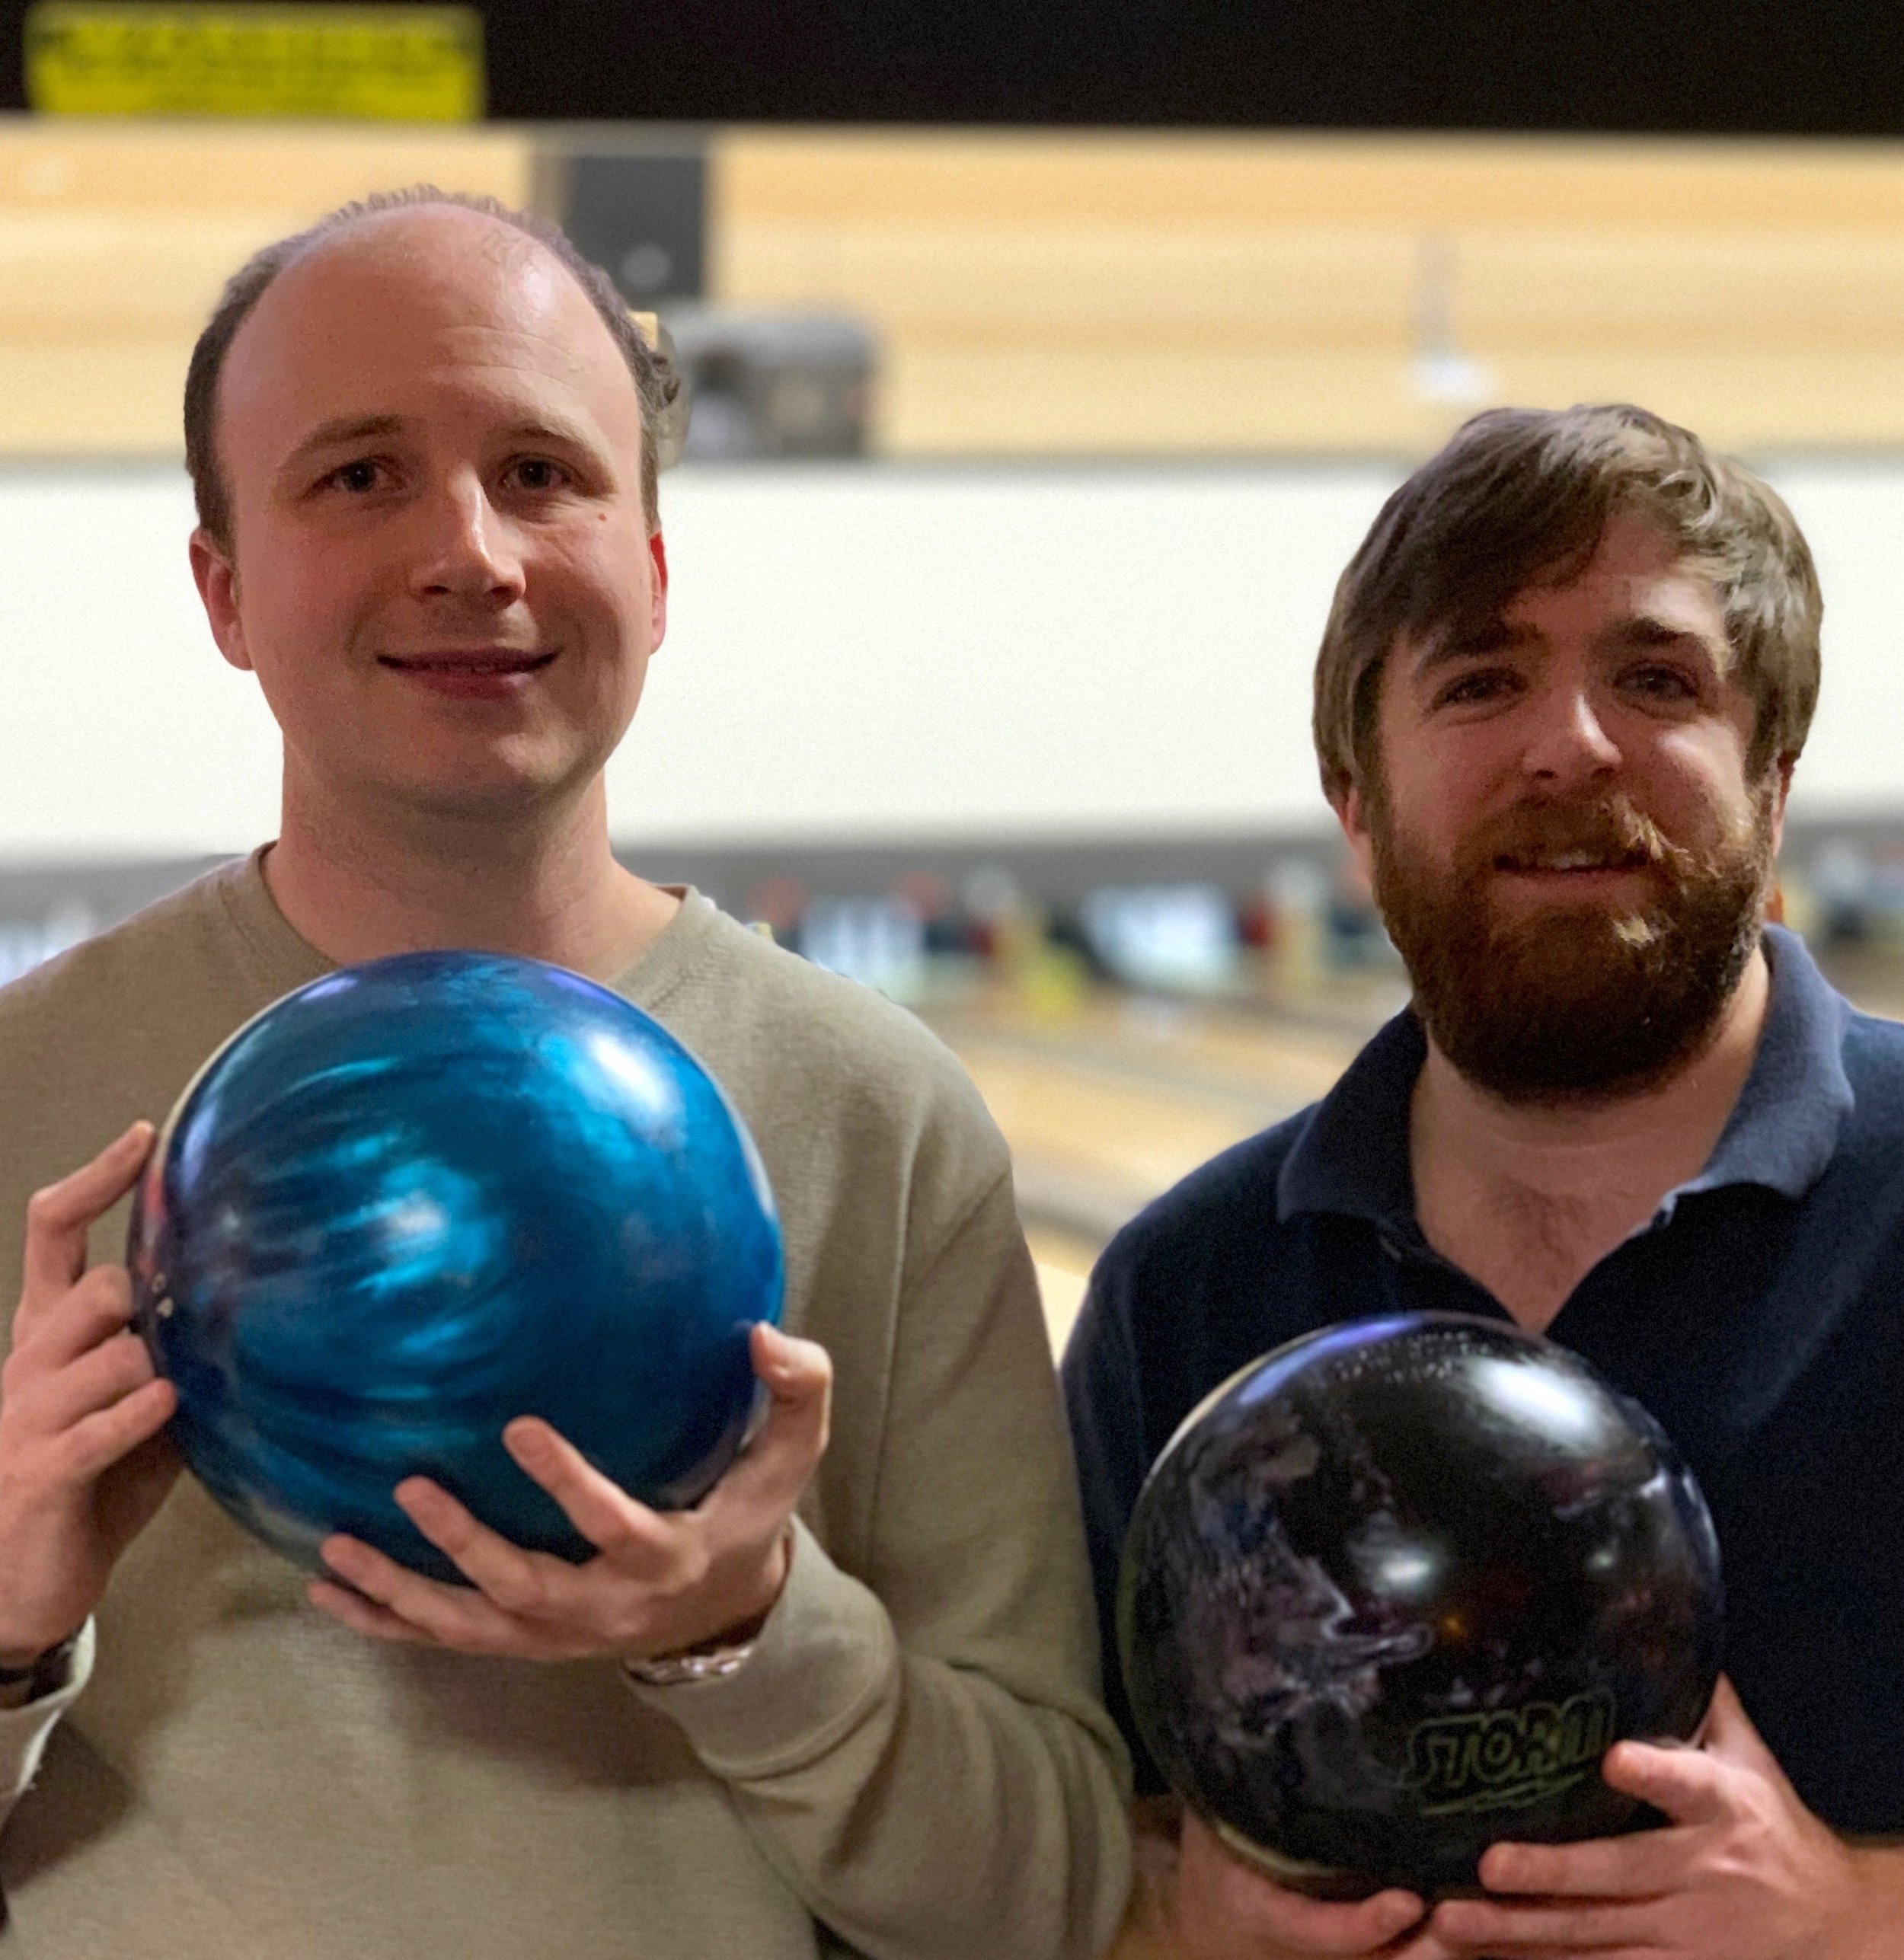 Footer Chris and Sean with bowling balls.jpg